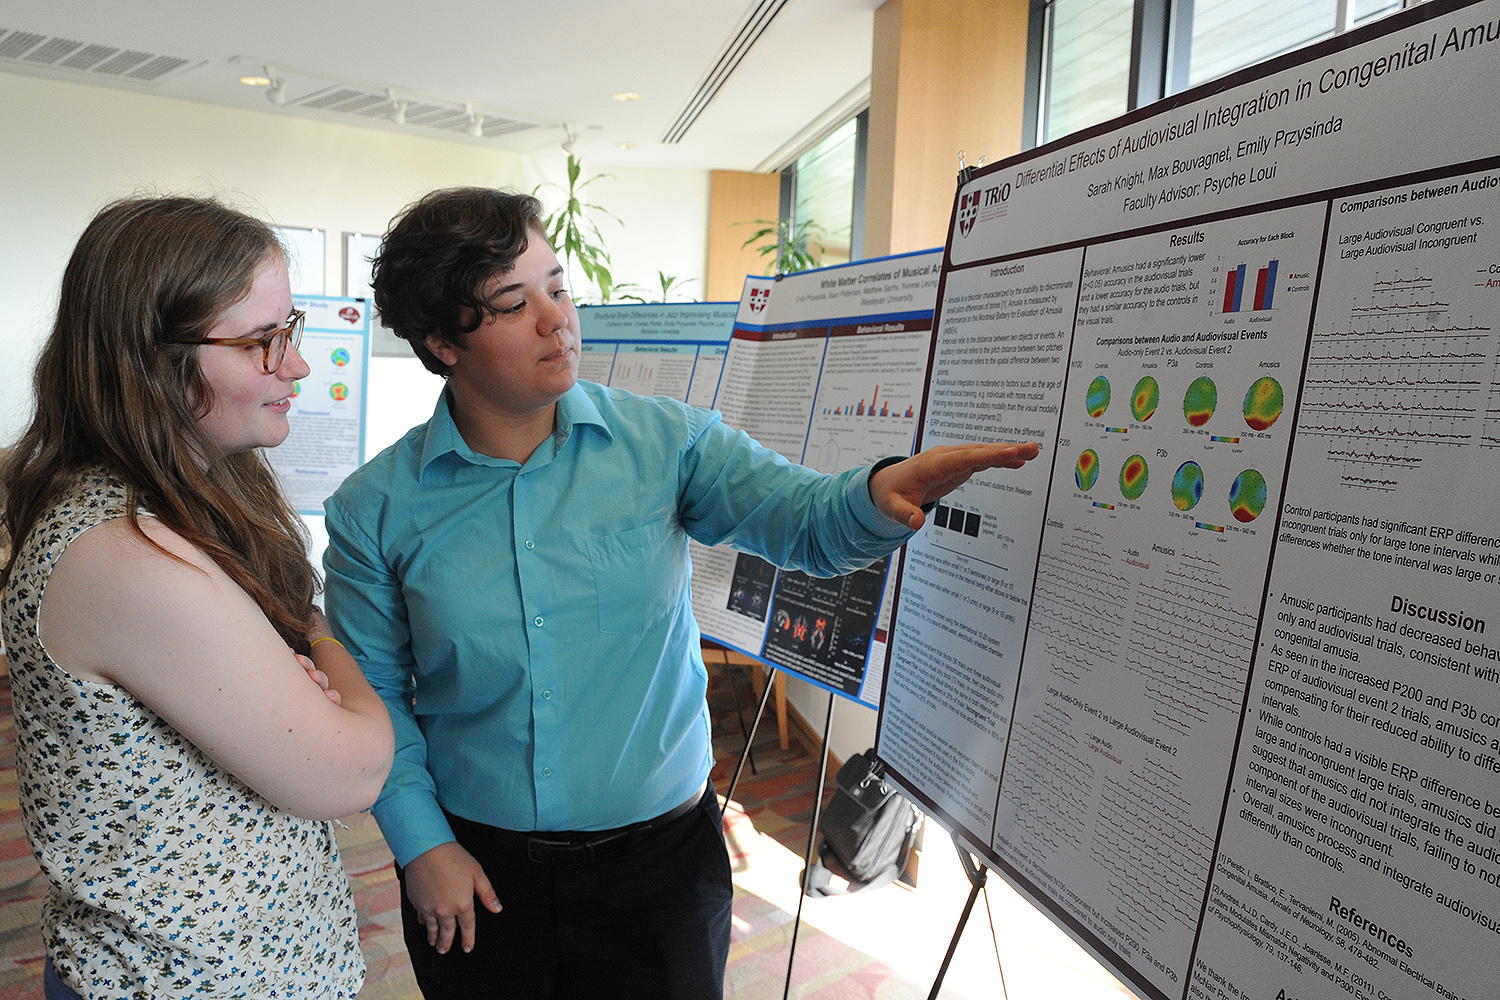 Sarah Knight ’17 presented a poster titled “Differential Effects of Audiovisual Integration in Congenital Amusia” at the NSB poster session.